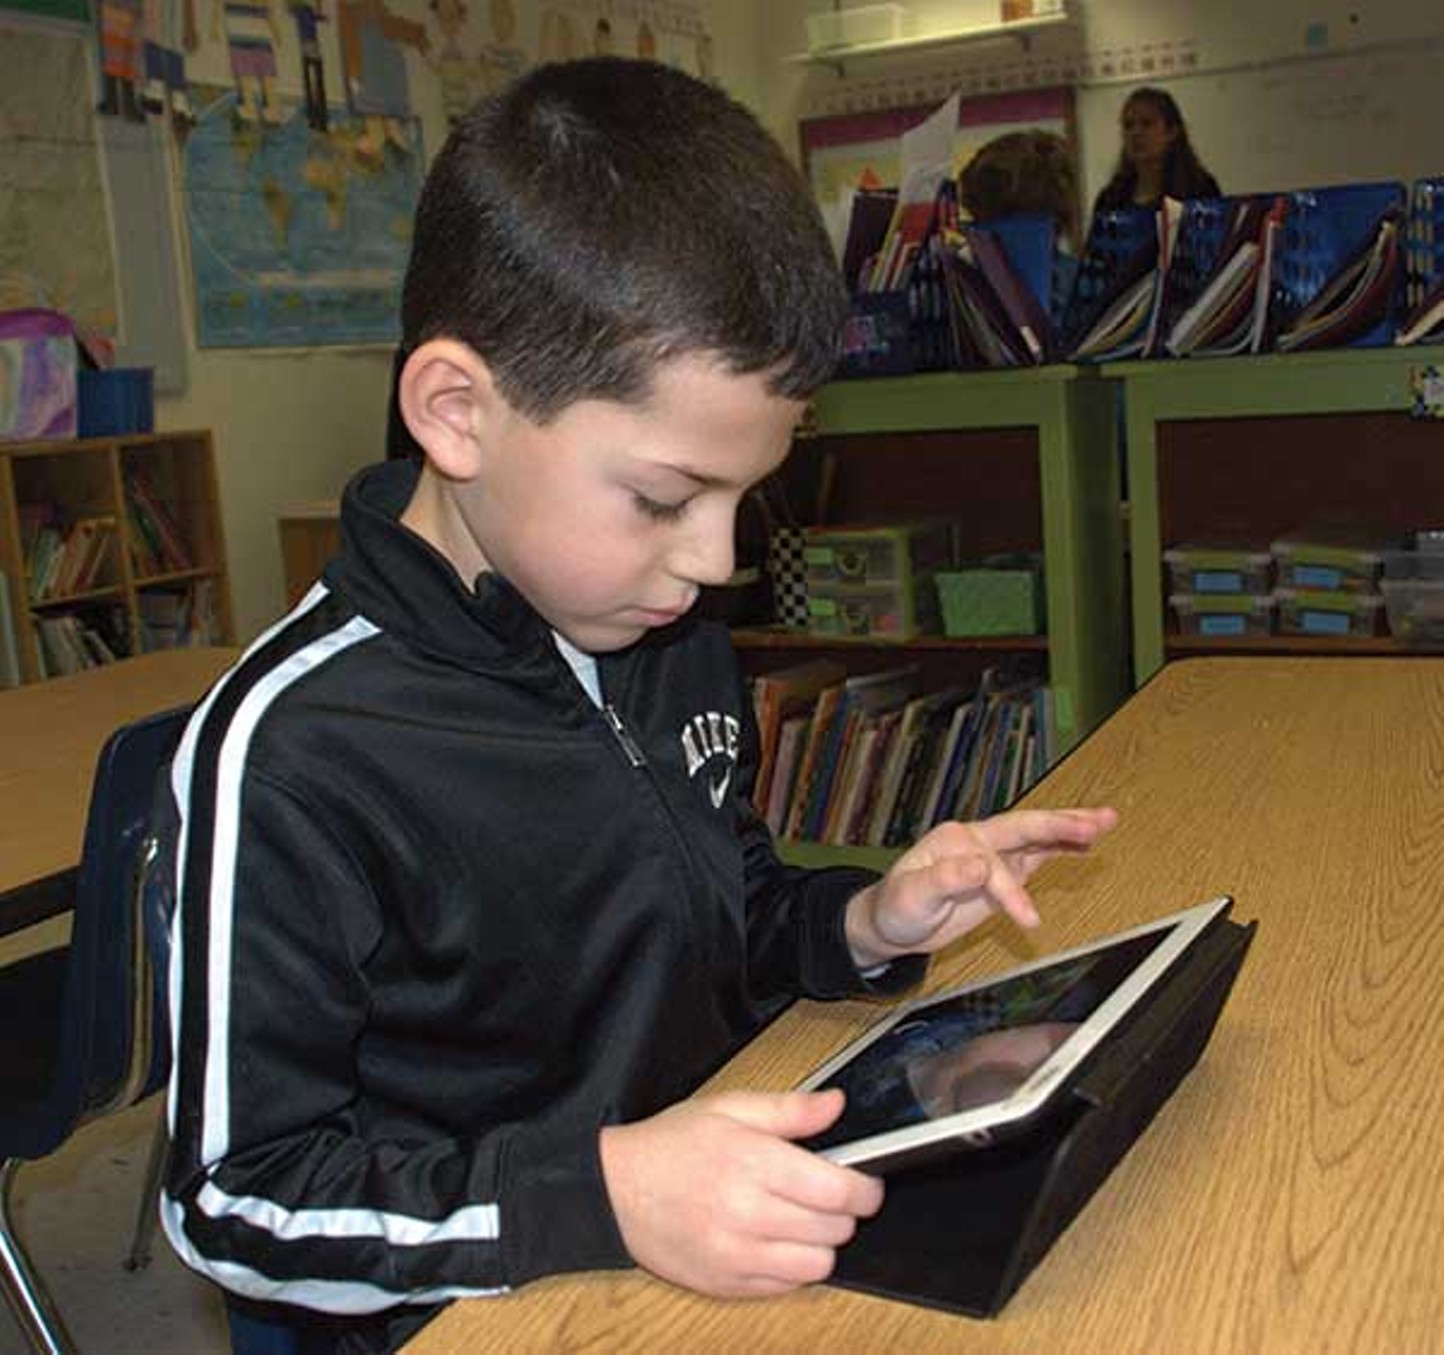 Technology In the Classroom